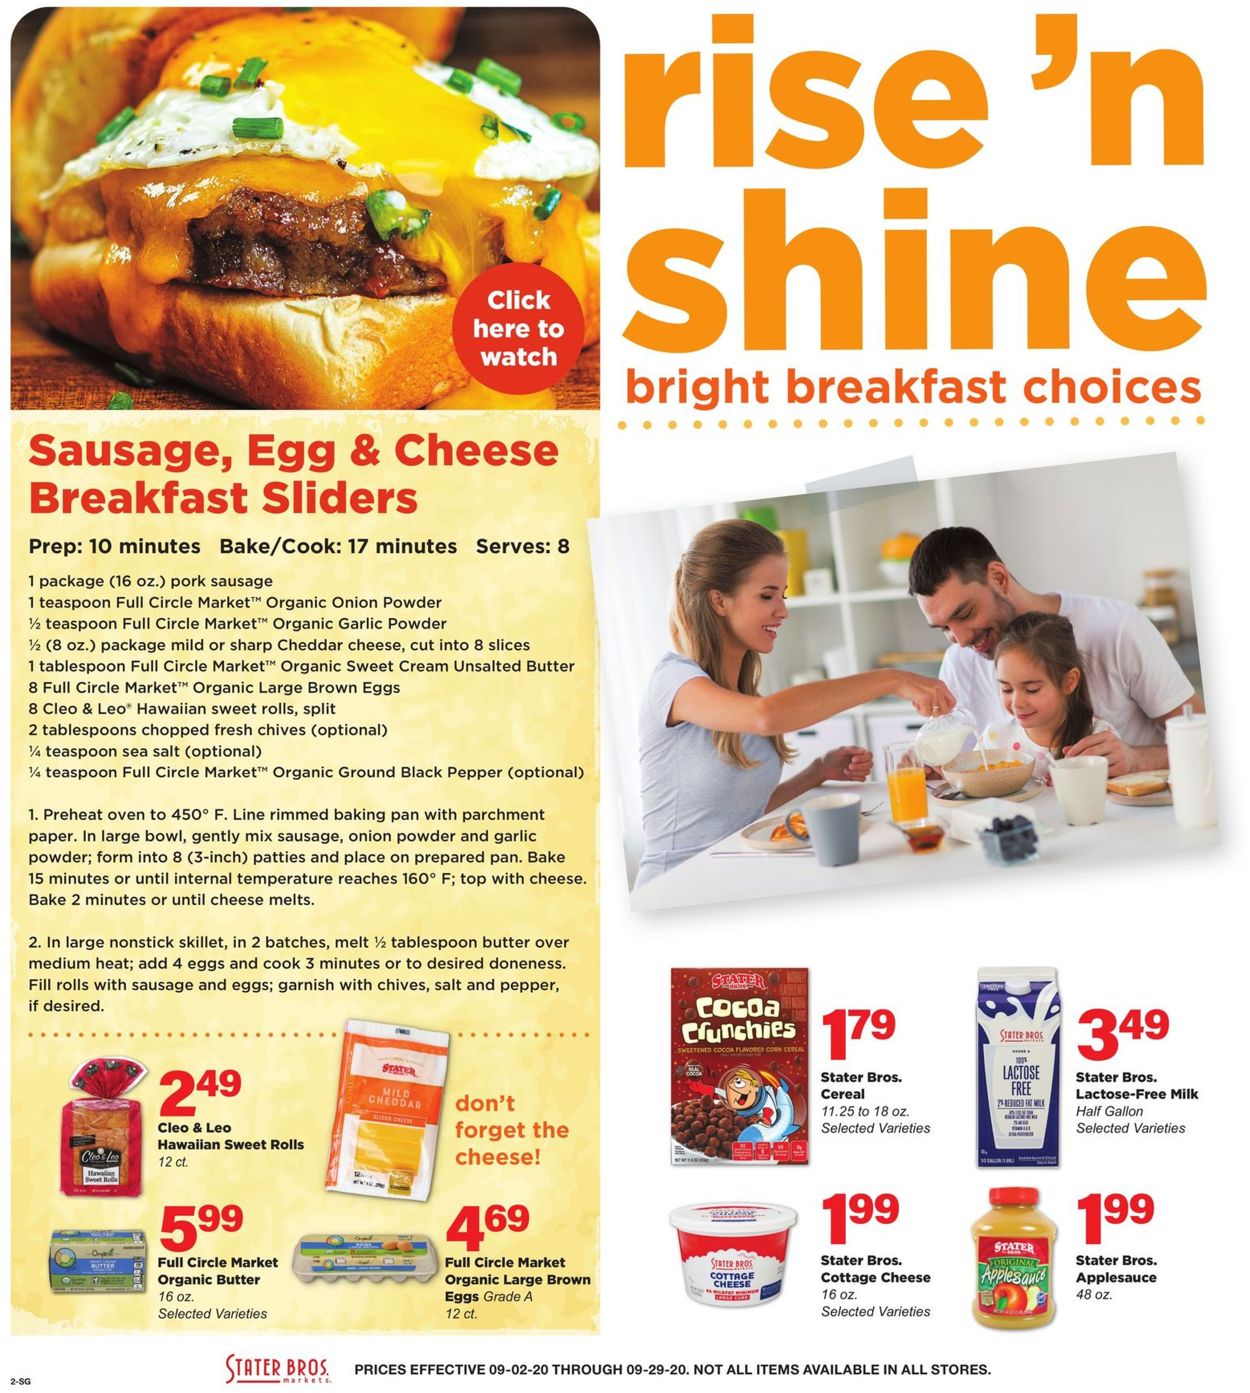 Stater Bros. Current weekly ad 09/02 09/29/2020 [2]